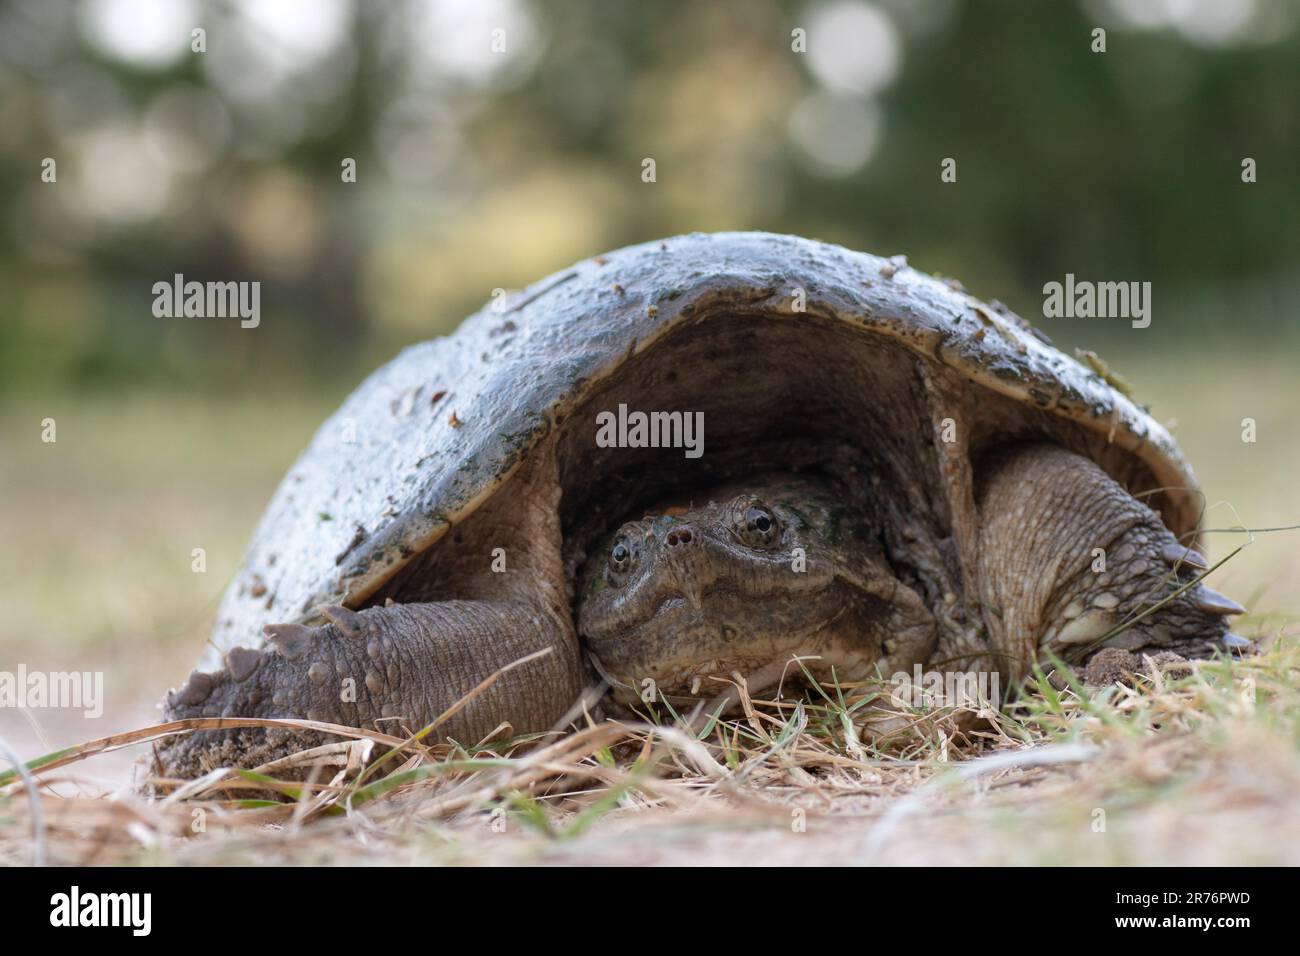 Frontal view of a common snapping turtle, Chelydra serpentina, in an East Texas forest, Stock Photo